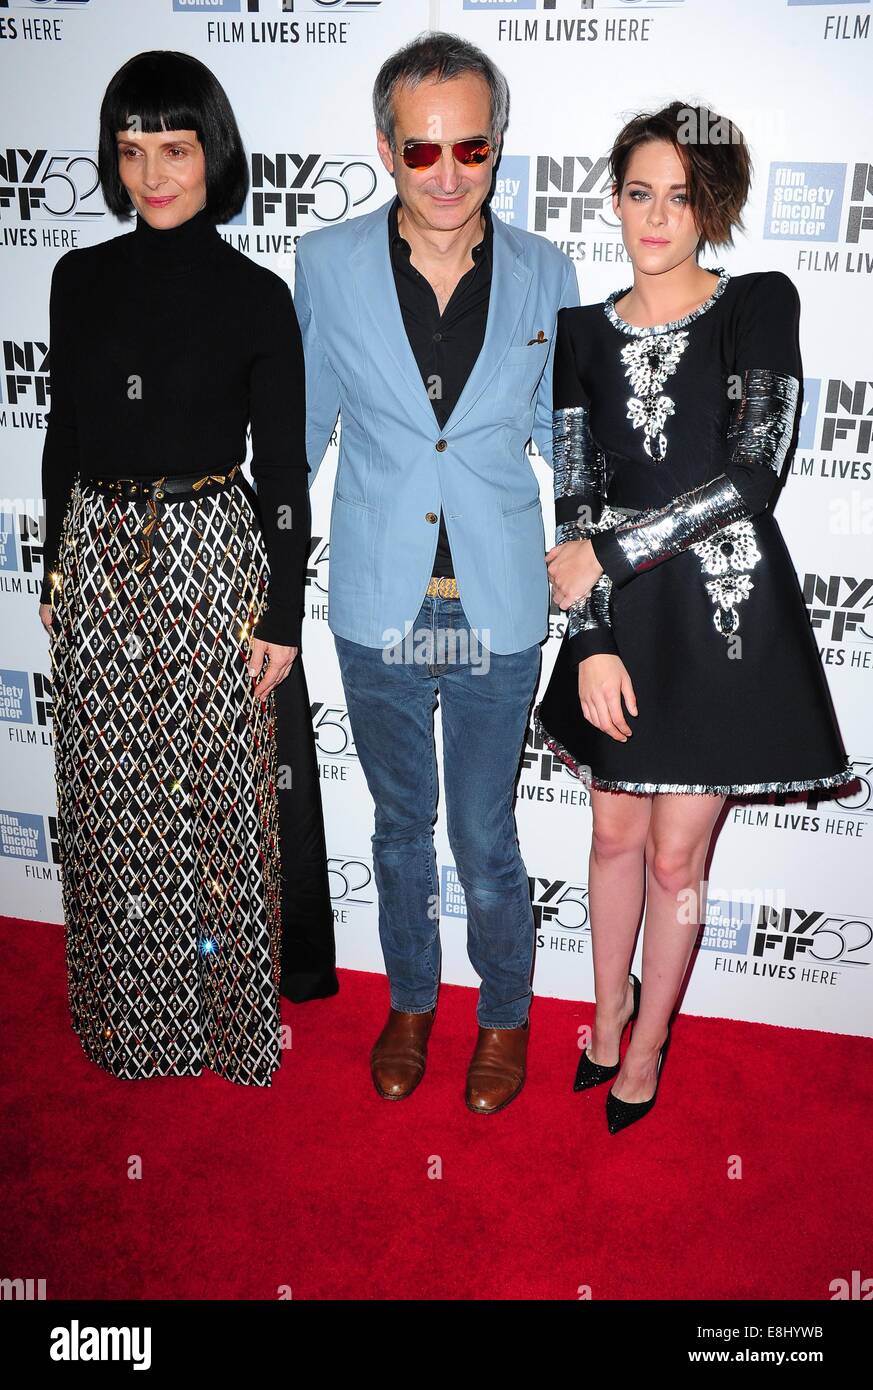 New York, USA. 8th October, 2014. Juliette Binoche, Olivier Assayas, Kristen Stewart at arrivals for CLOUDS OF SILS MARIA Premiere at the 52nd New York Film Festival, Alice Tully Hall at Lincoln Center, new, NY October 8, 2014. Photo By: Gregorio T. Binuya/Everett Collection/ Alamy Live News Stock Photo